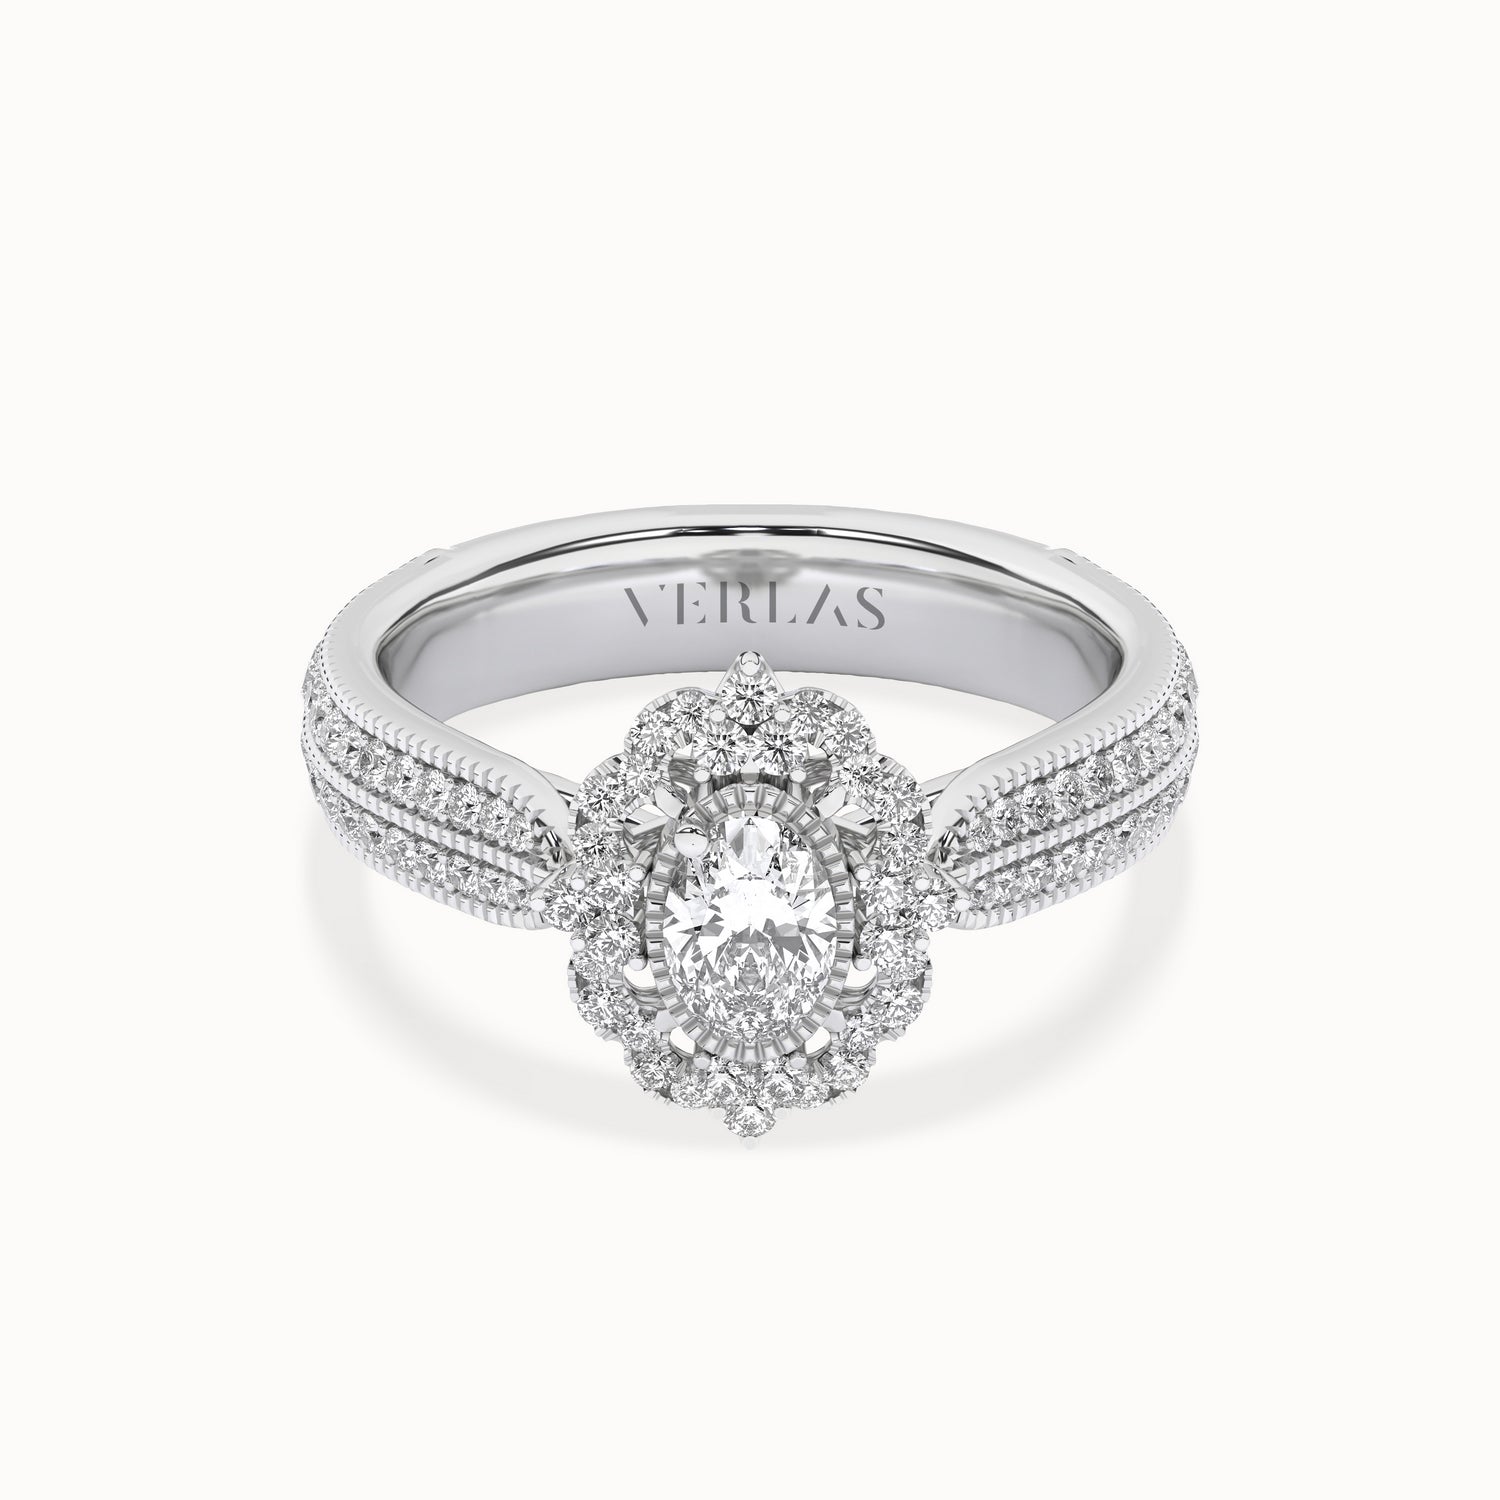 Ornate Ellipse Ring_Product Angle_1Ct - 1